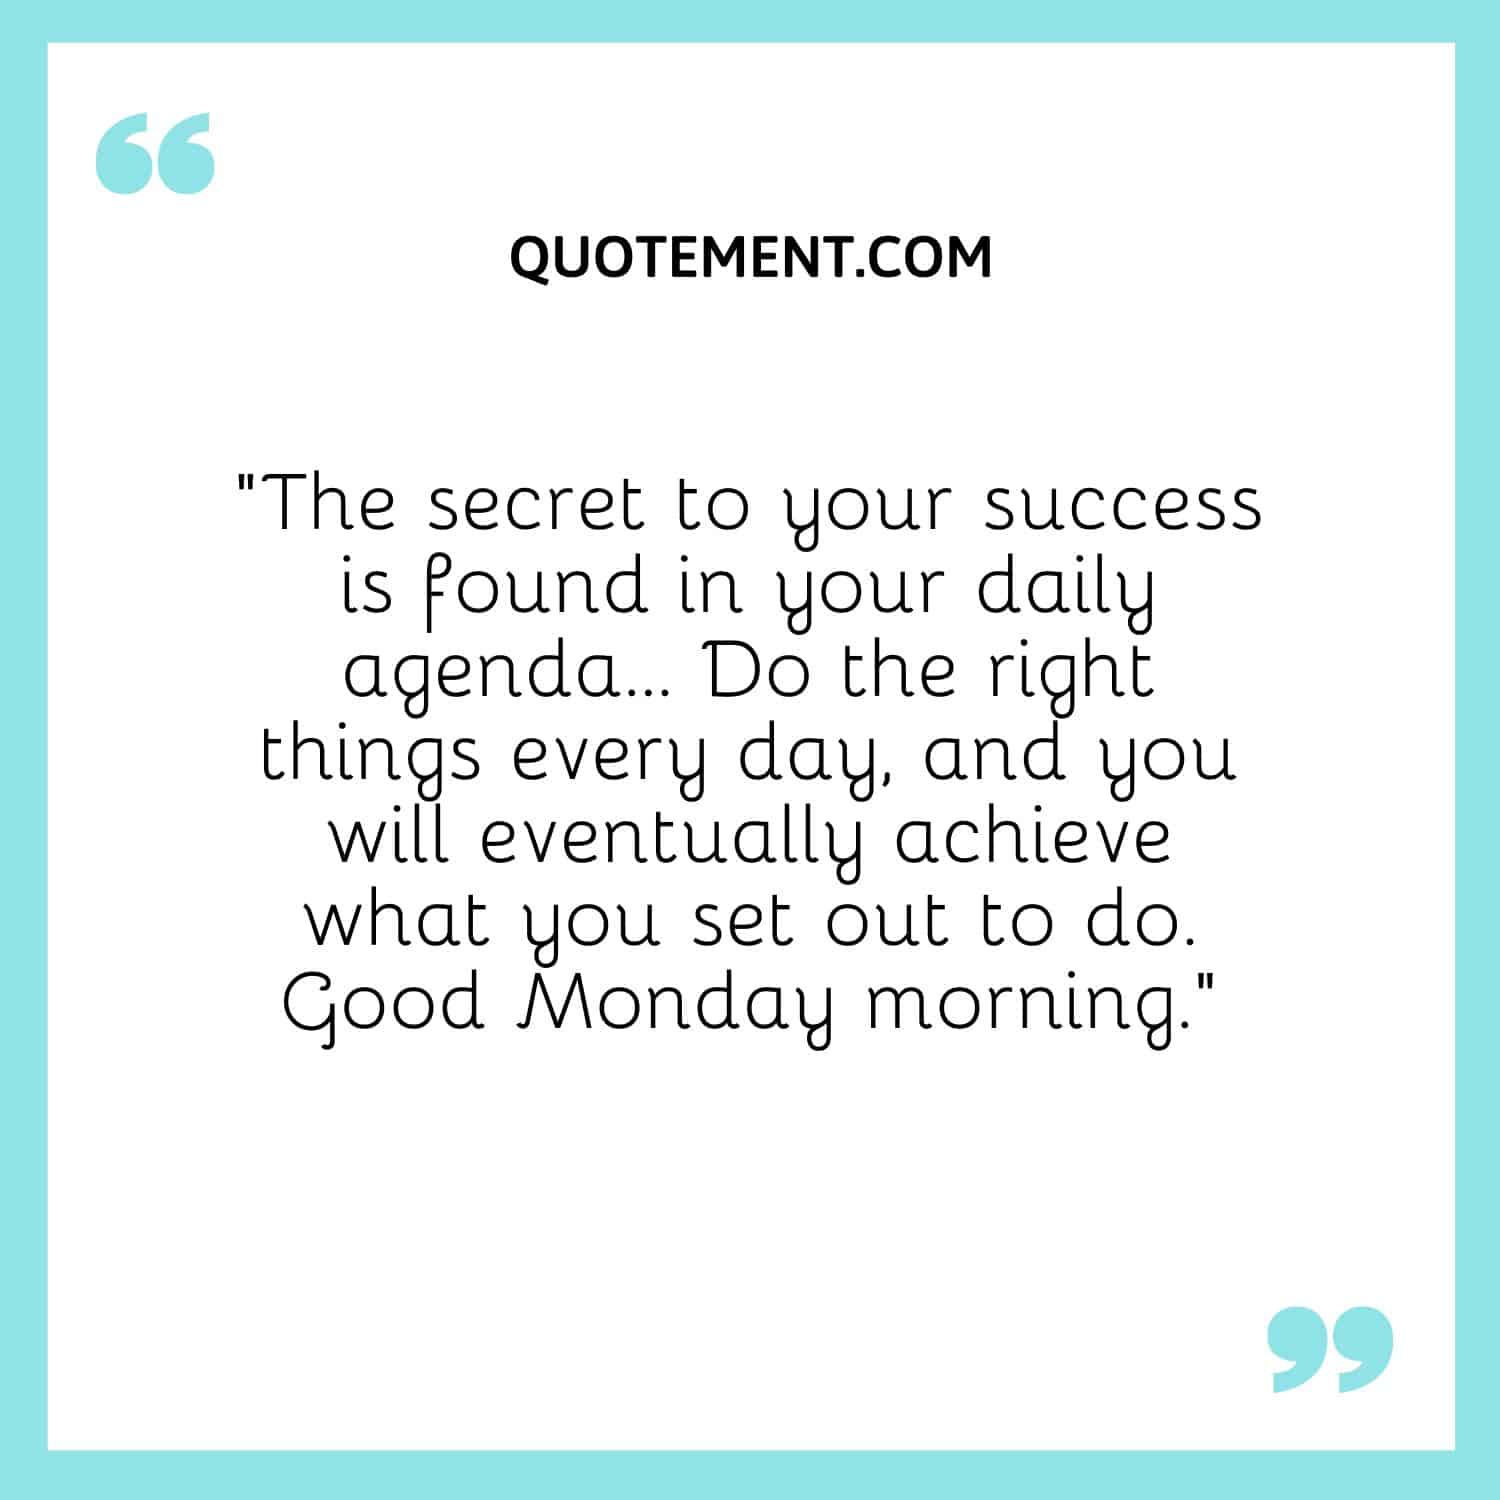 The secret to your success is found in your daily agenda